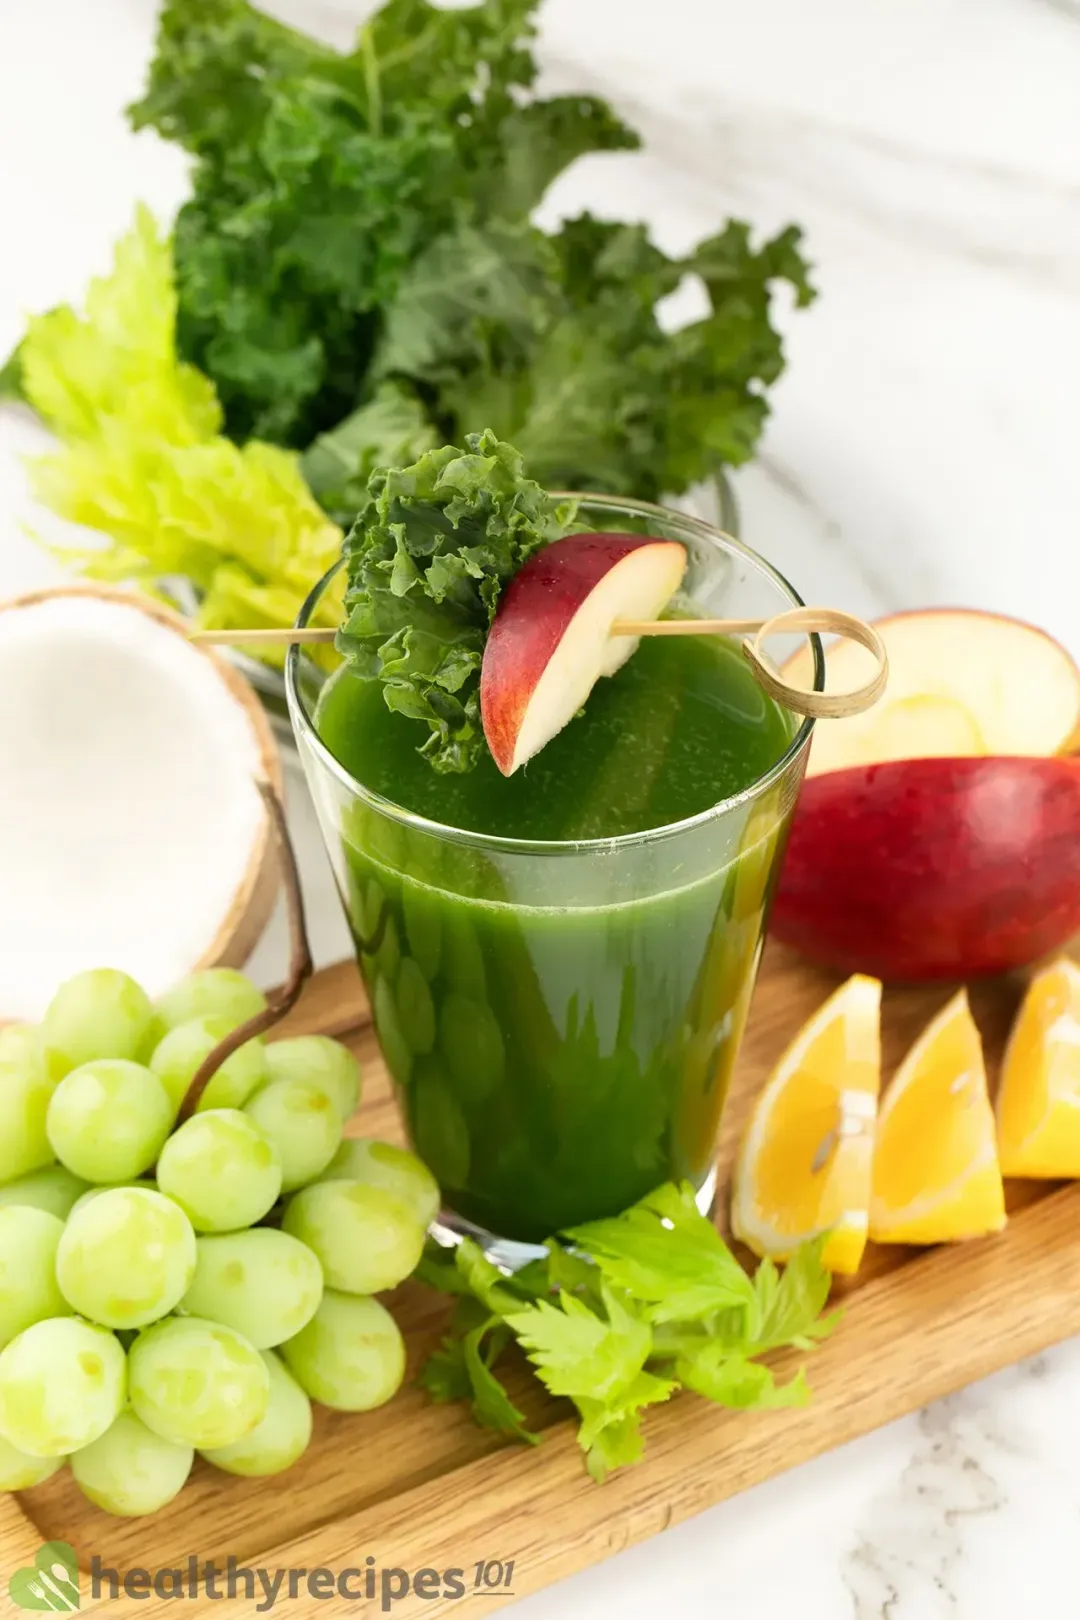 A glass of green machine juice, some grapes, celery, three wedges of lemon, and an apple placed on a long wooden board with some greens on the background